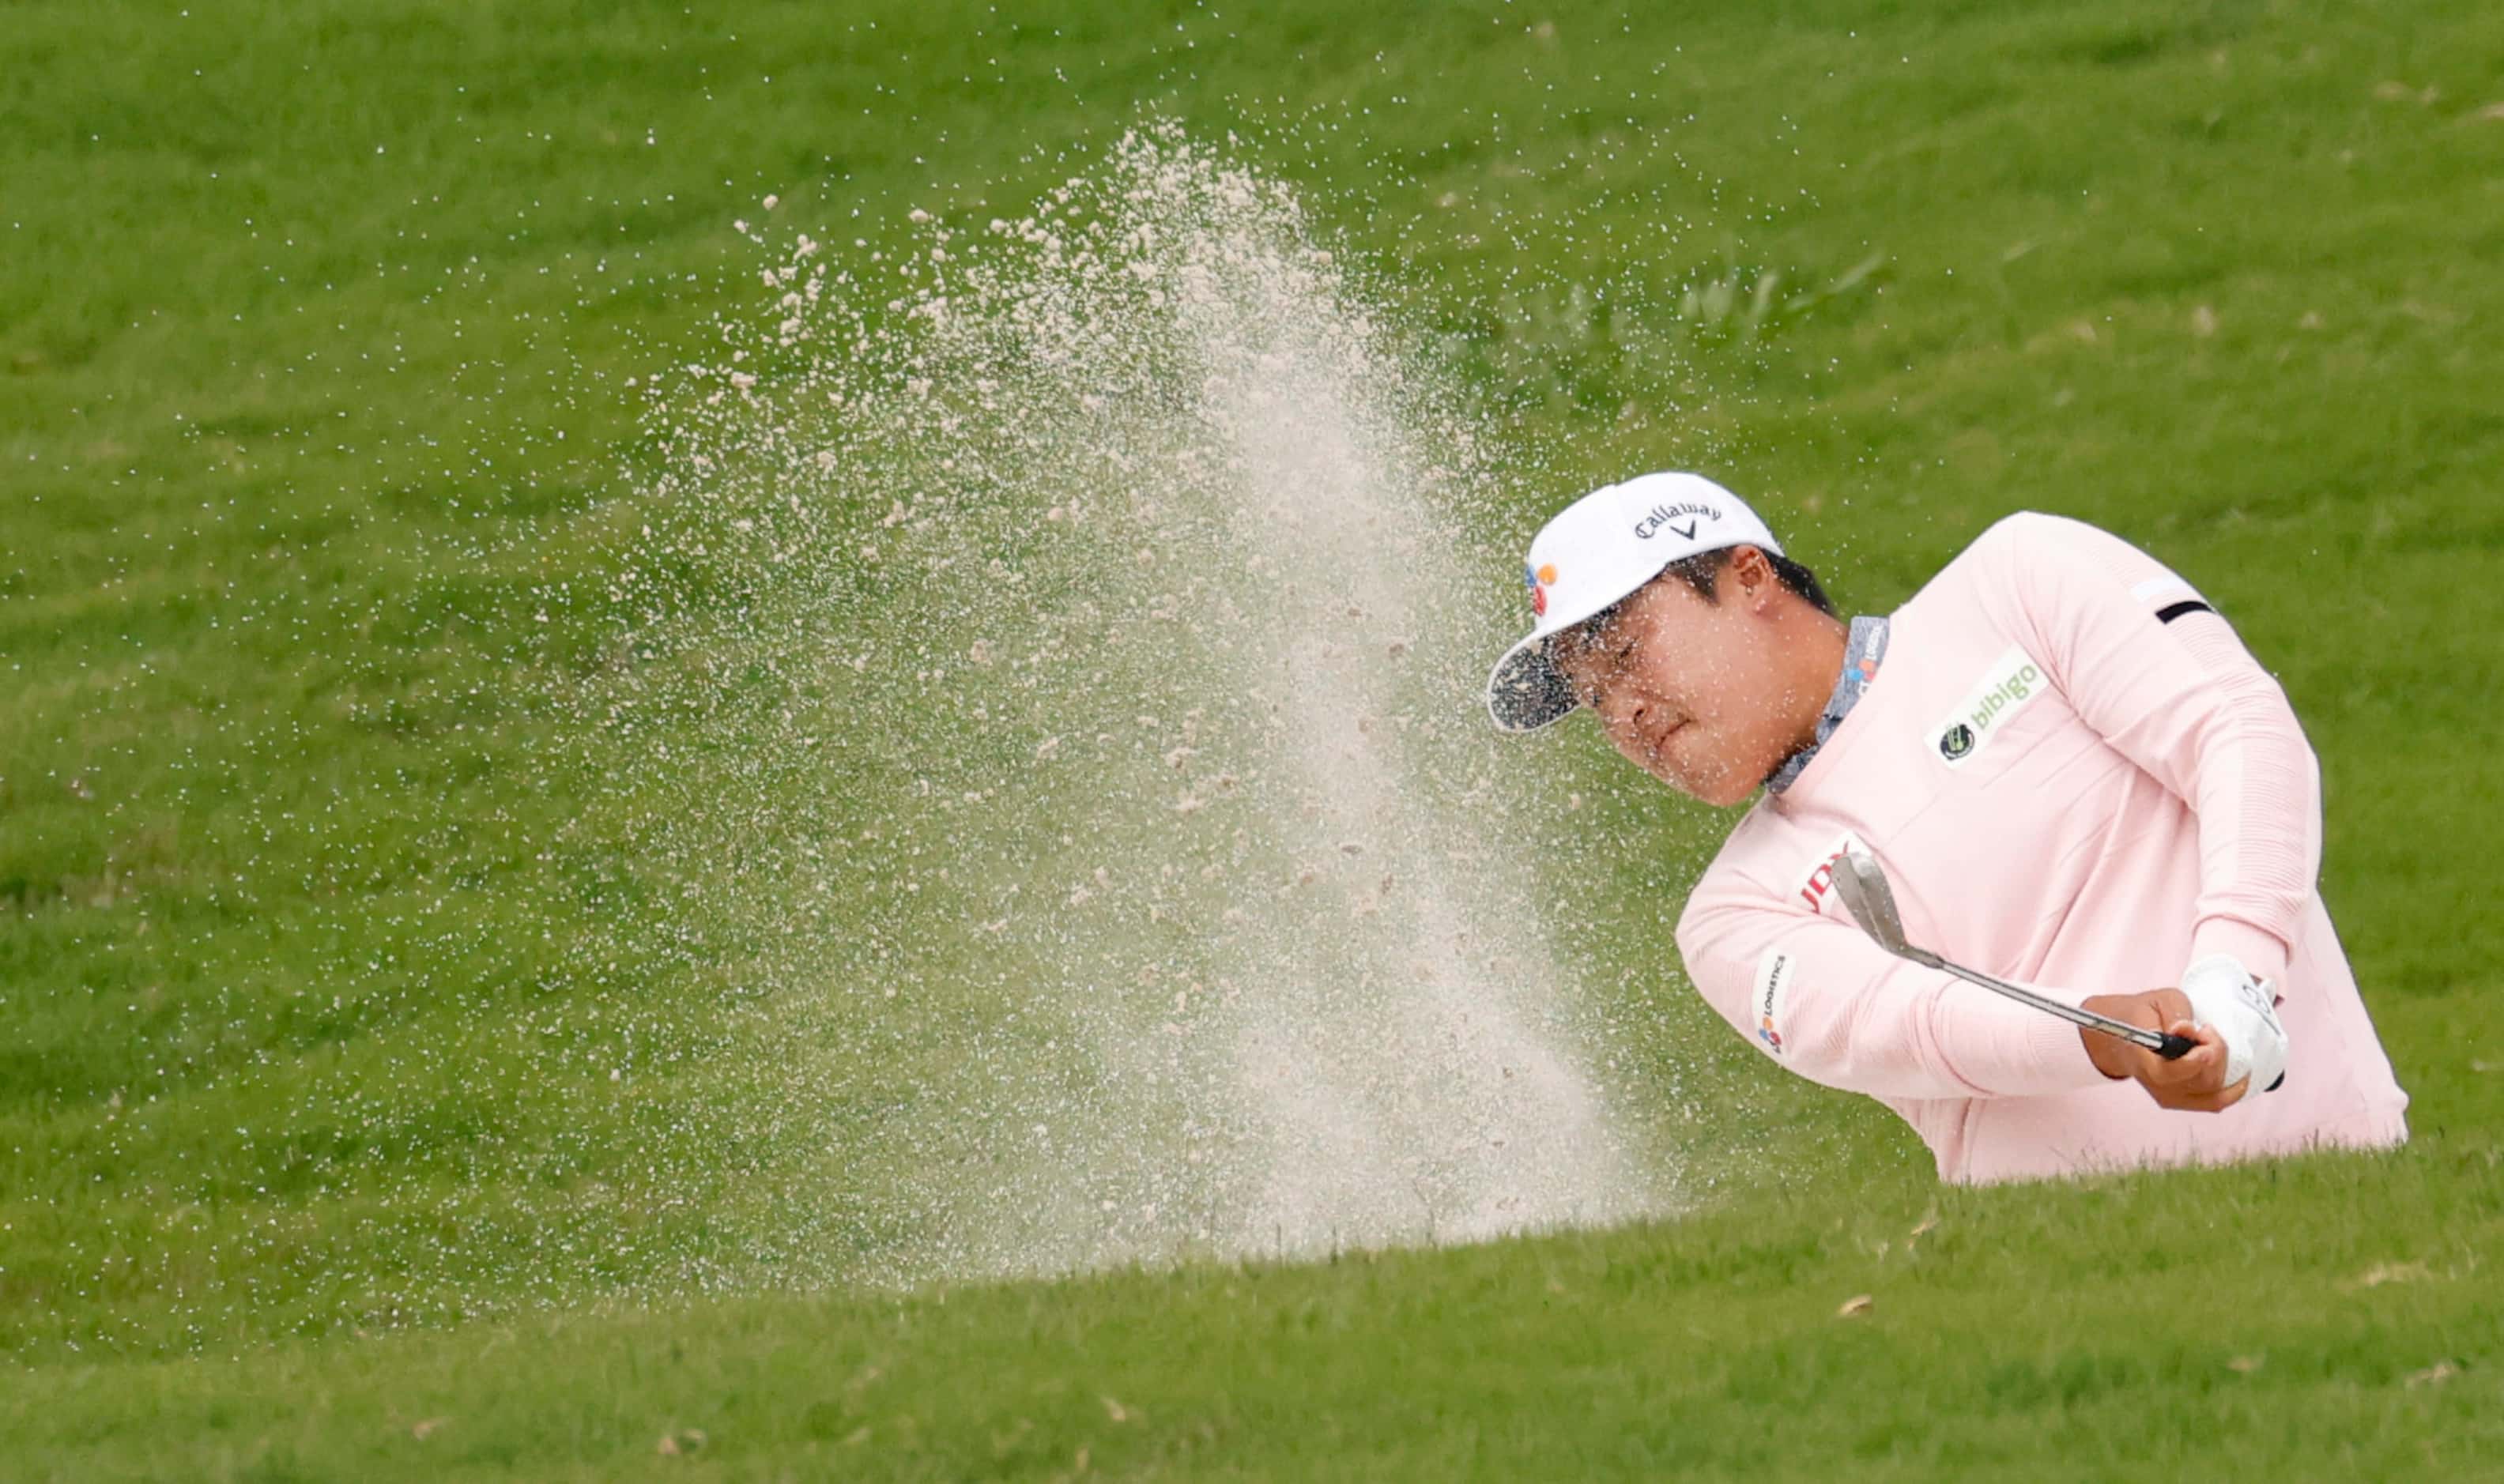 Kyoung-Hoon Lee hits from a bunker on the 6th hole during round 2 of the AT&T Byron Nelson ...